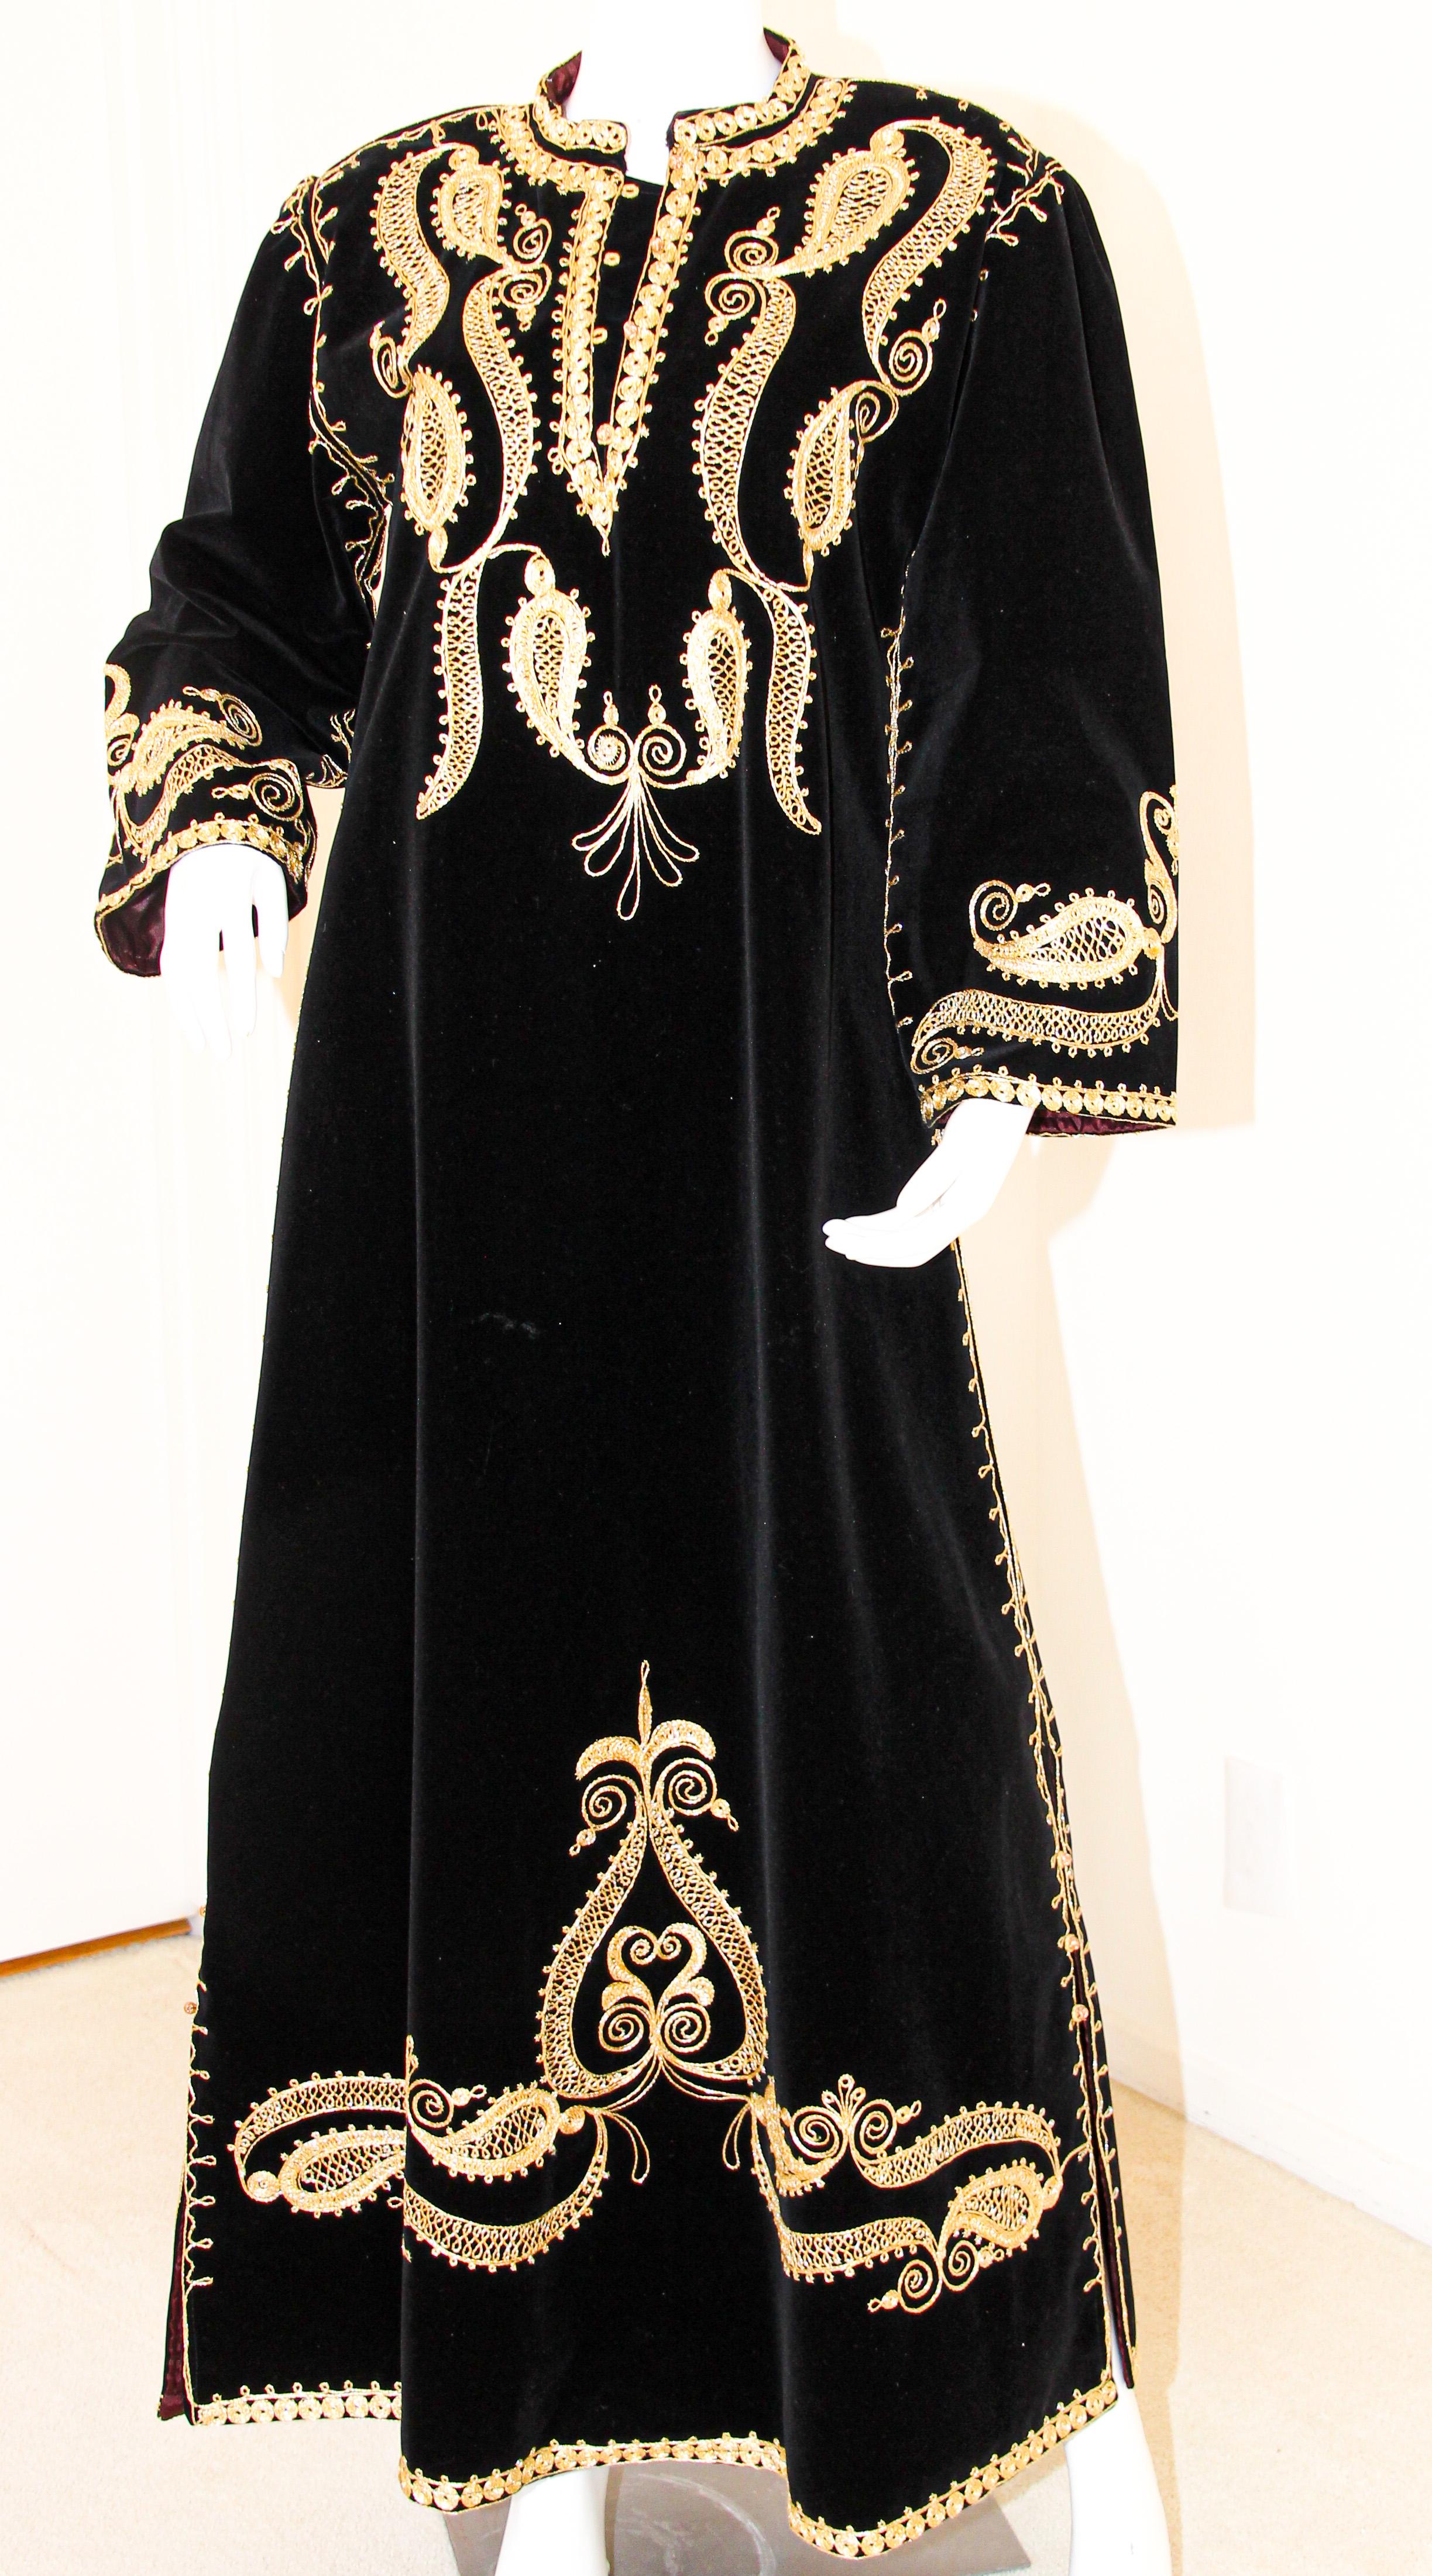 The Bindalli henna dress is a garment made for special occasions such as weddings.
Bindallis were worn by the bride, and her female family and friends. 
Marked by elaborate floral designs bindallis were decorated with dival embroidery, a technique